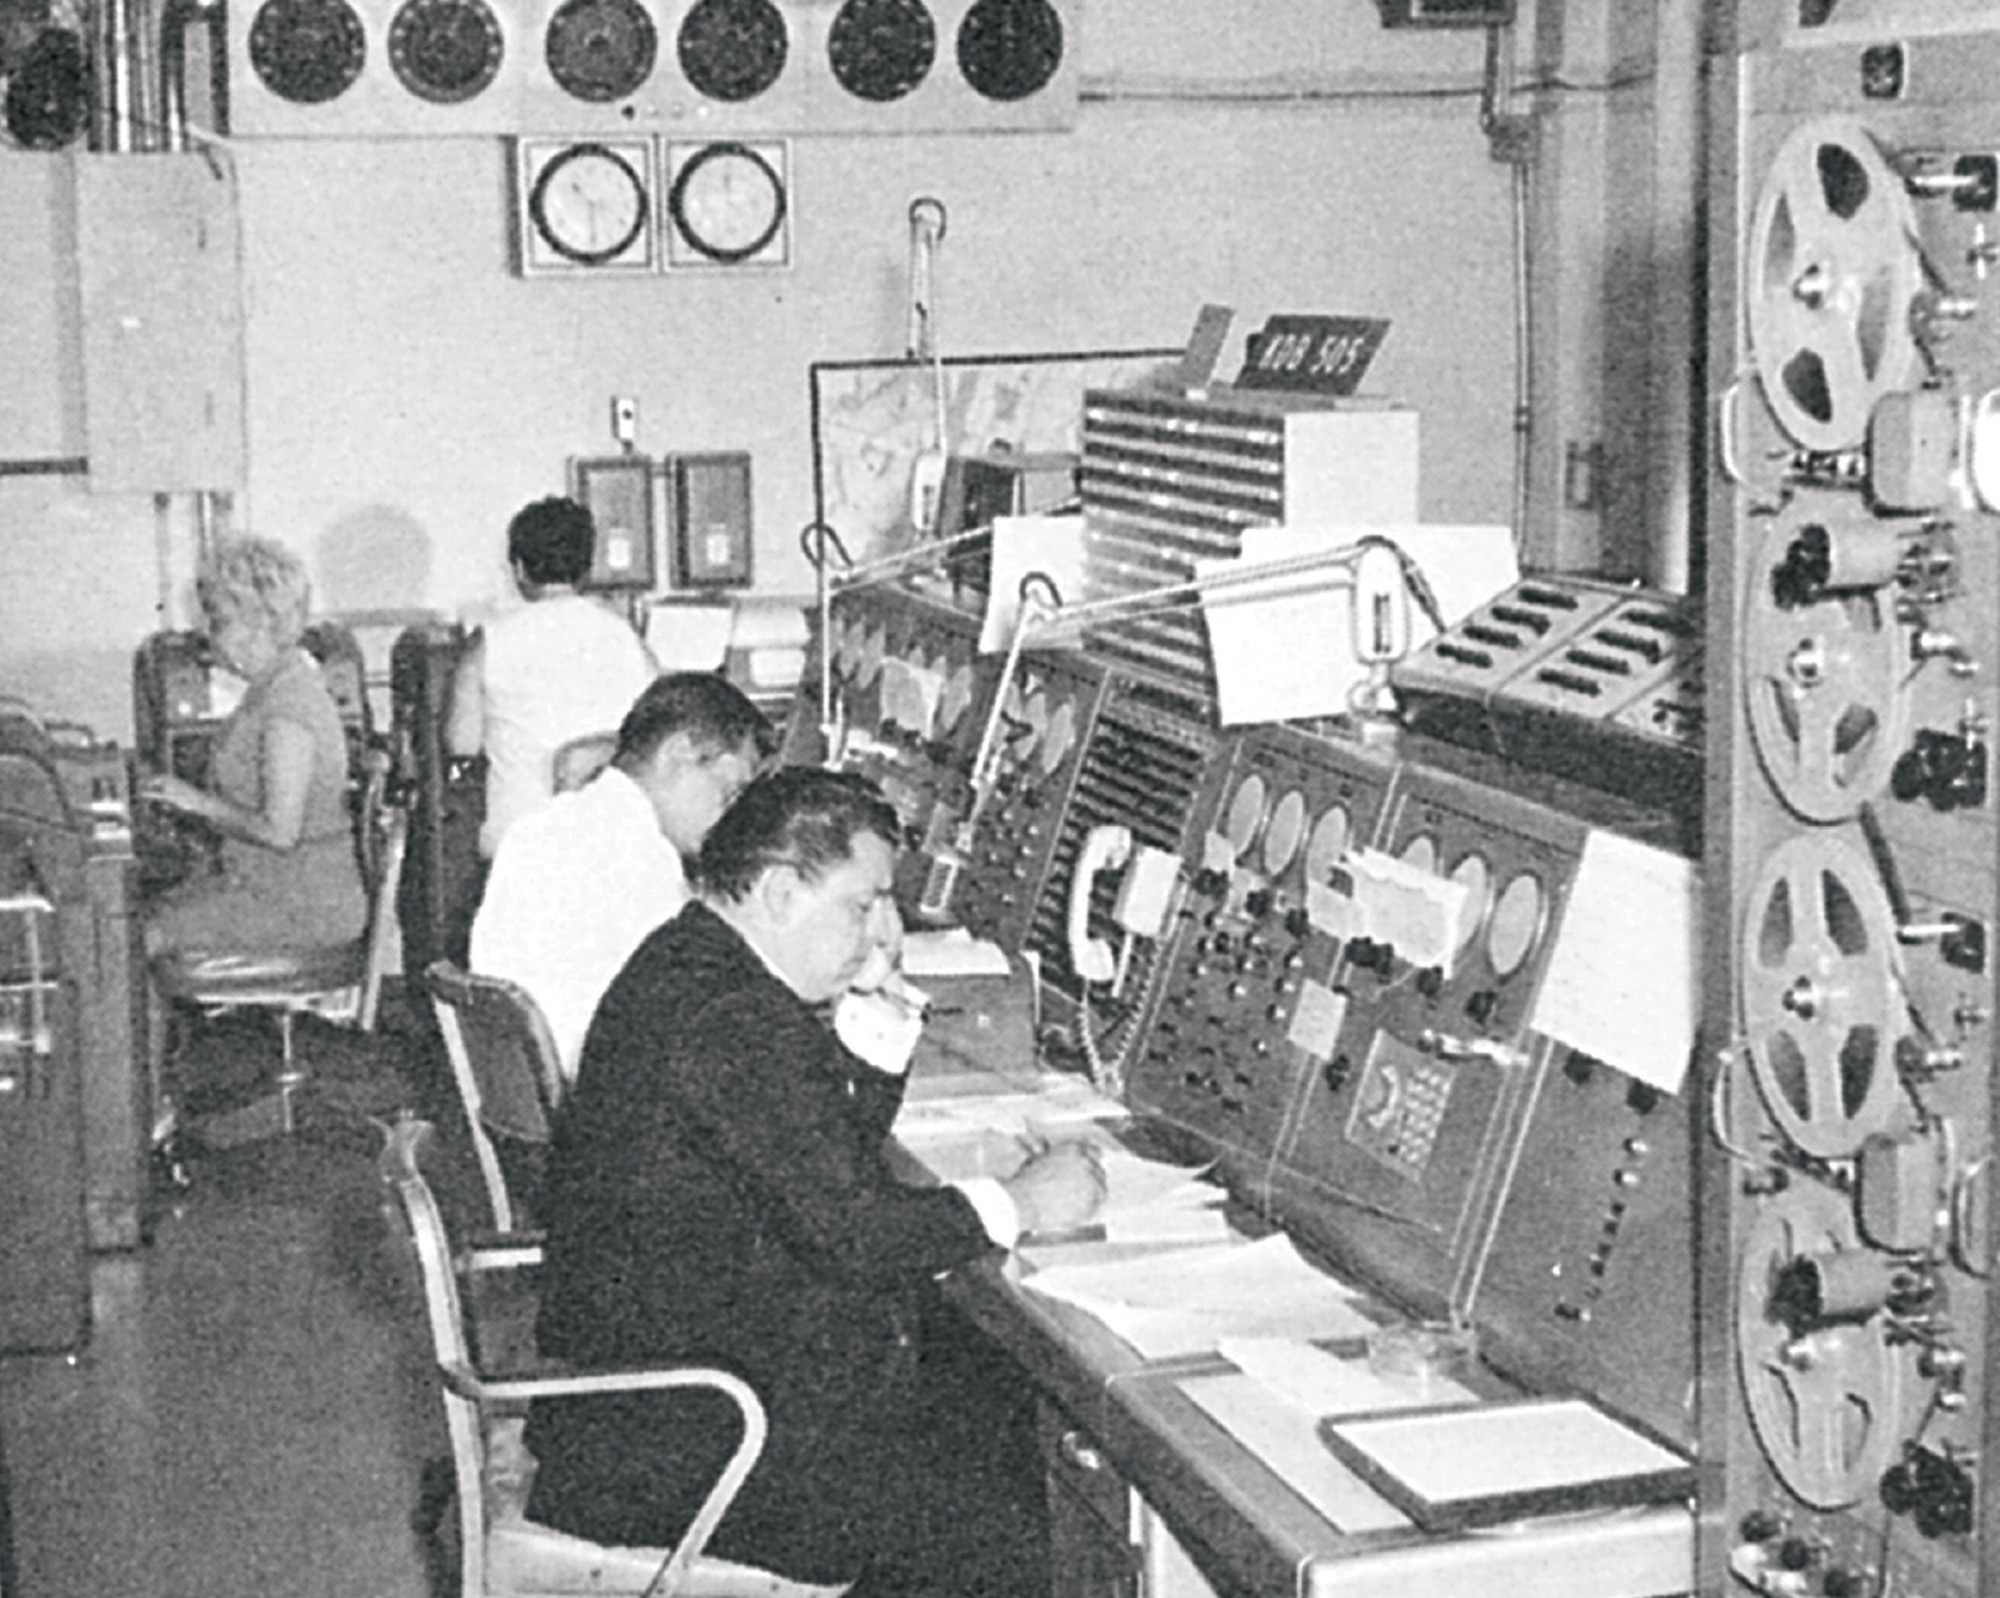 Analogue control center, New York City, 1966. Courtesy The New York City Department of Traffic.